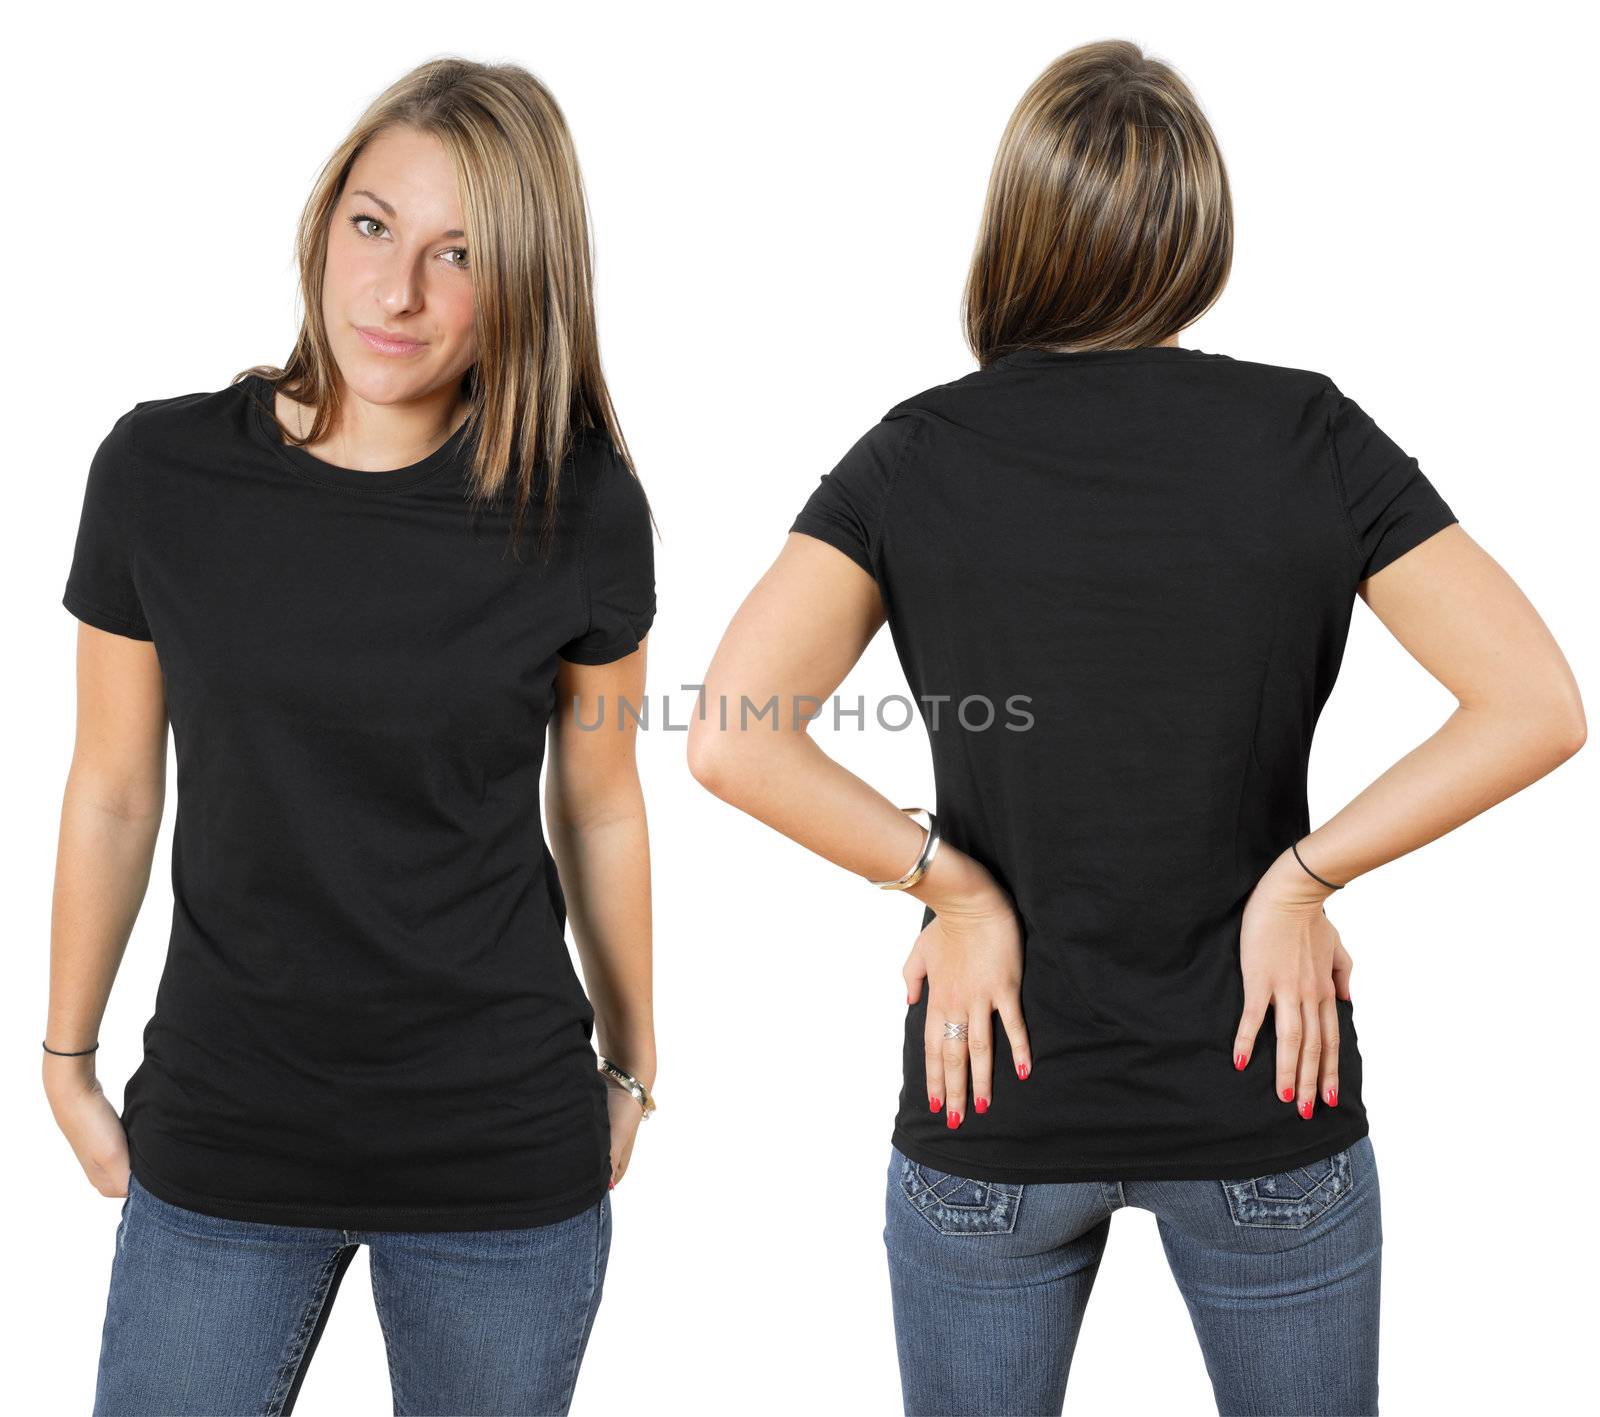 Young beautiful female wearing blank black shirt, front and back. Ready for your design or logo.